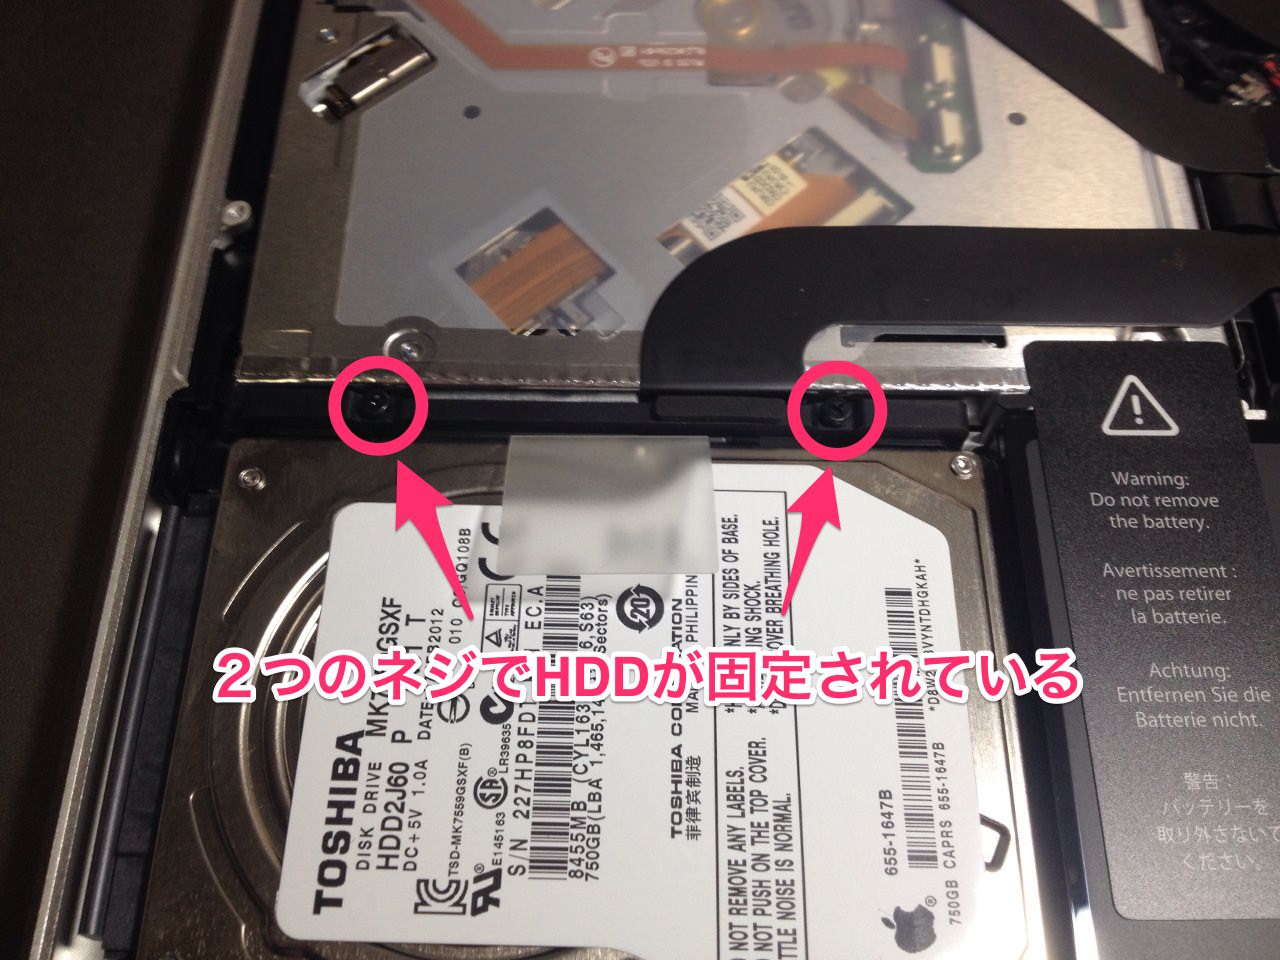 how-to-upgrade-your-macbook-pro-to-a-ssd-09